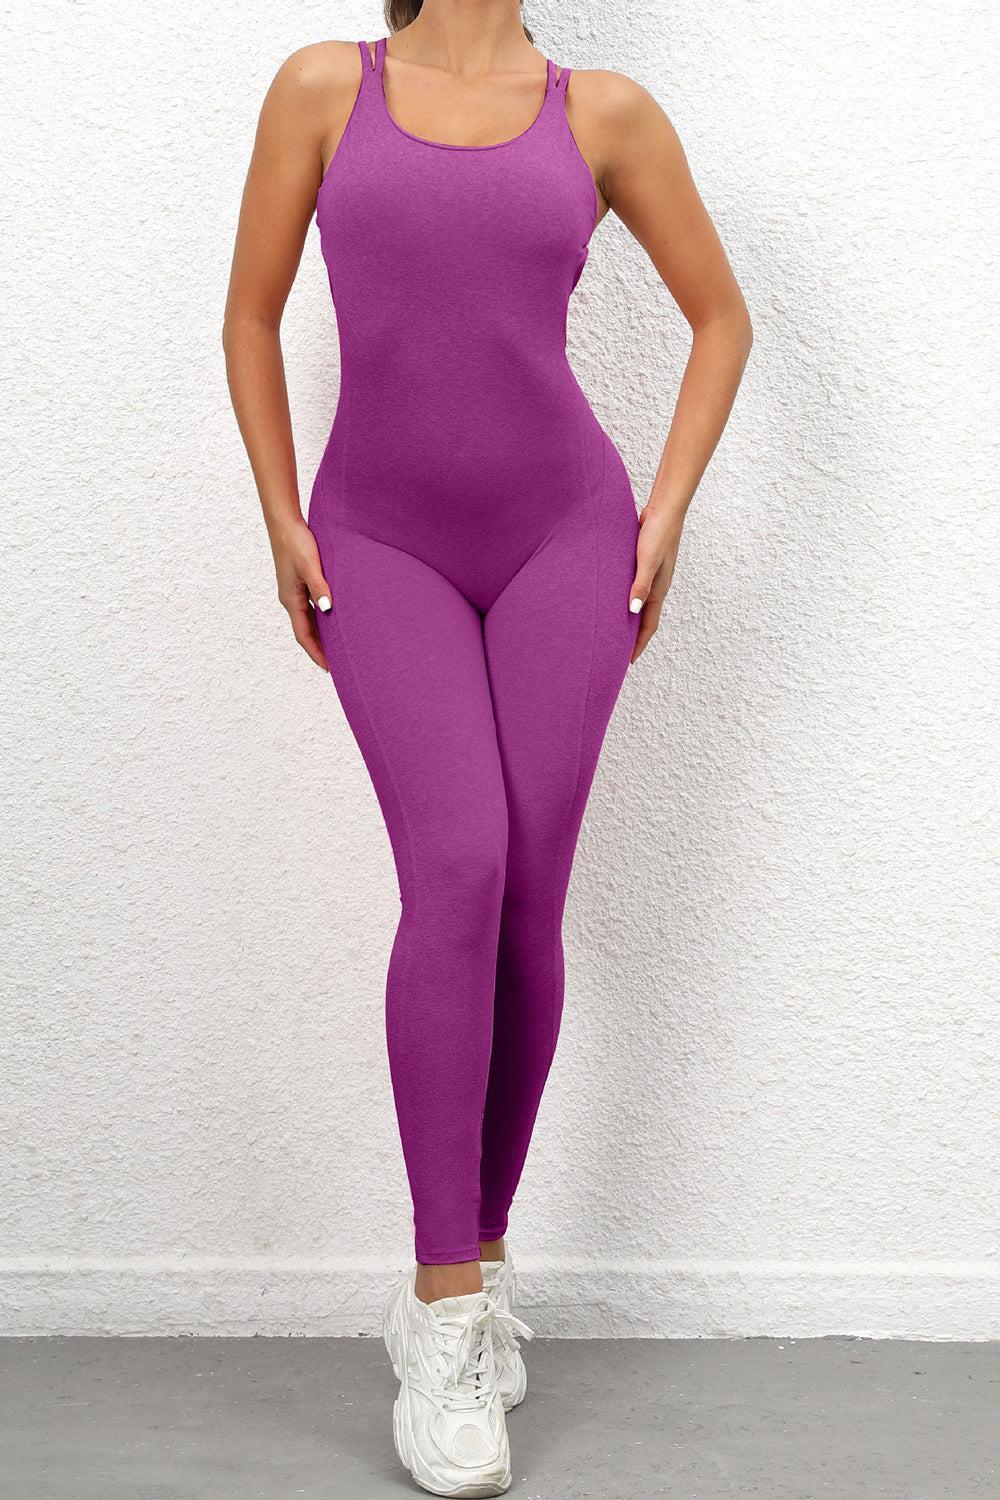 a woman in a purple bodysuit posing for a picture